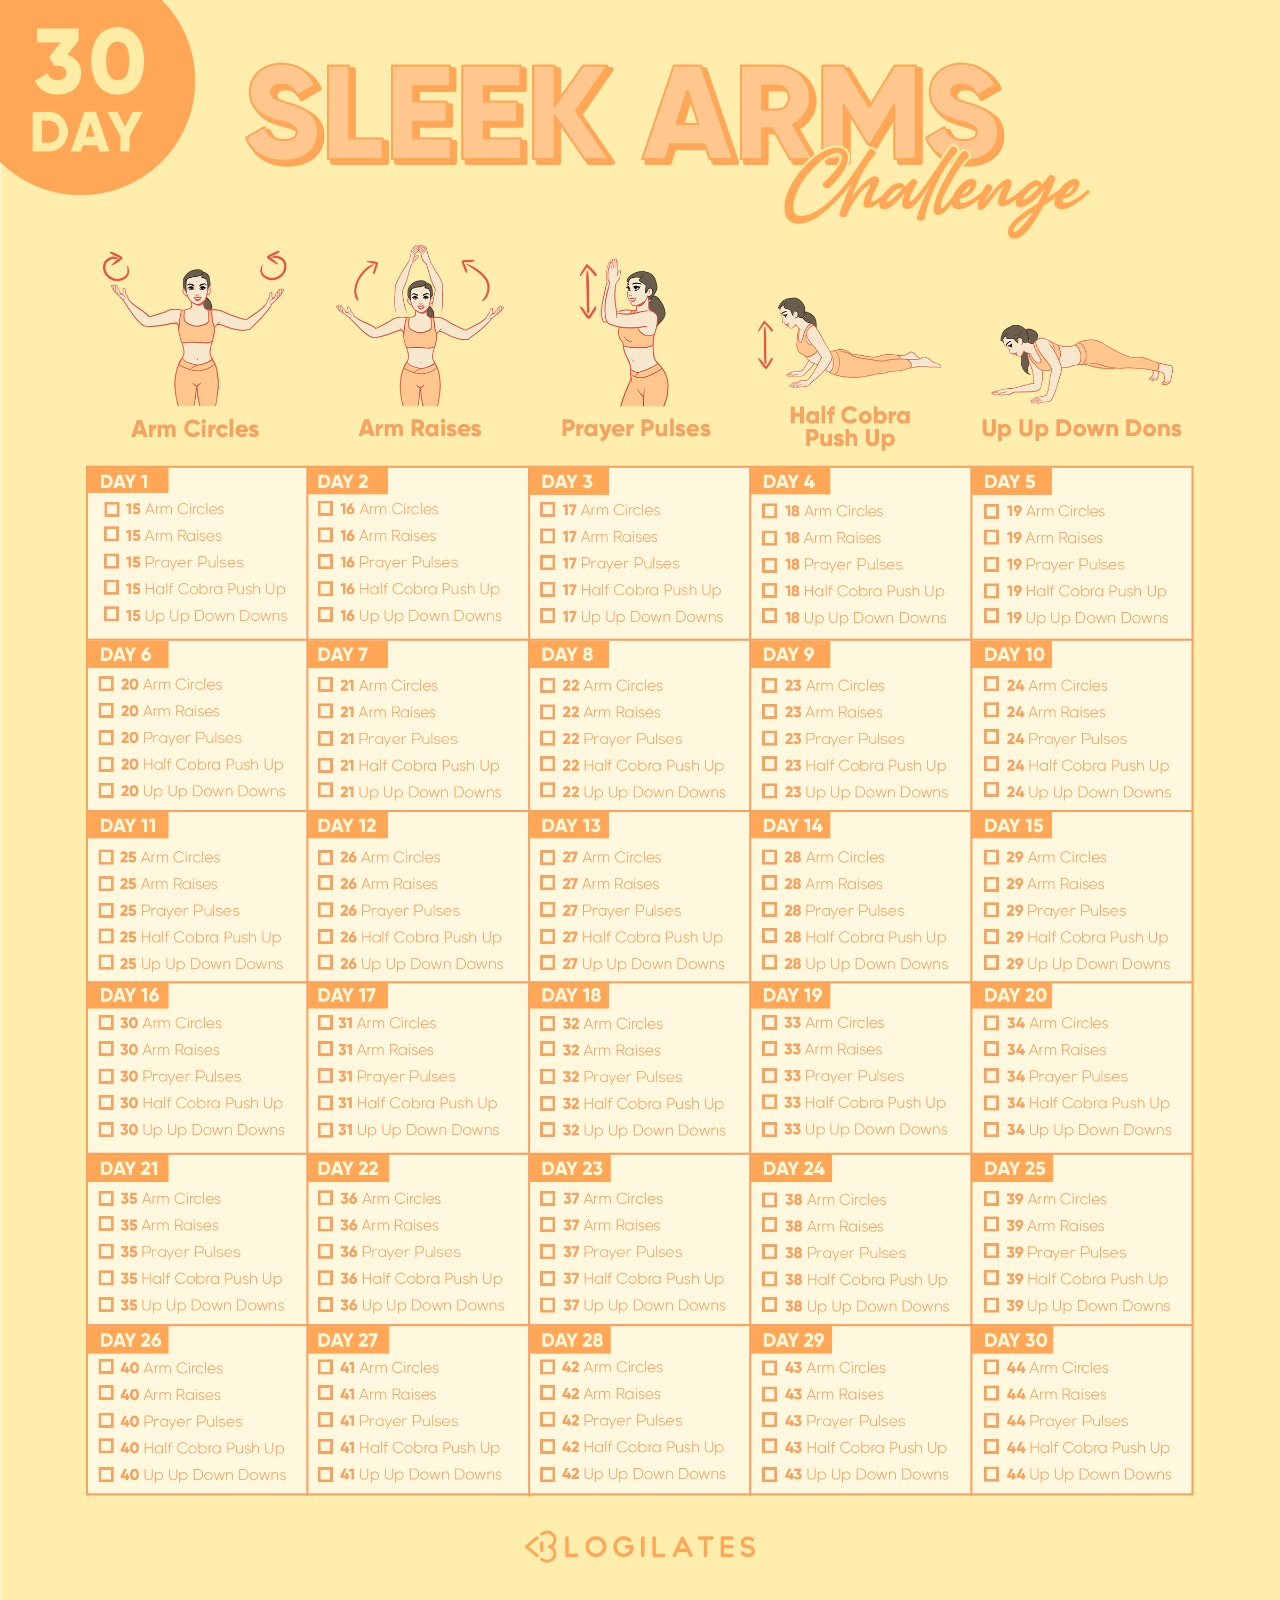 30 day pull up challenge calendar